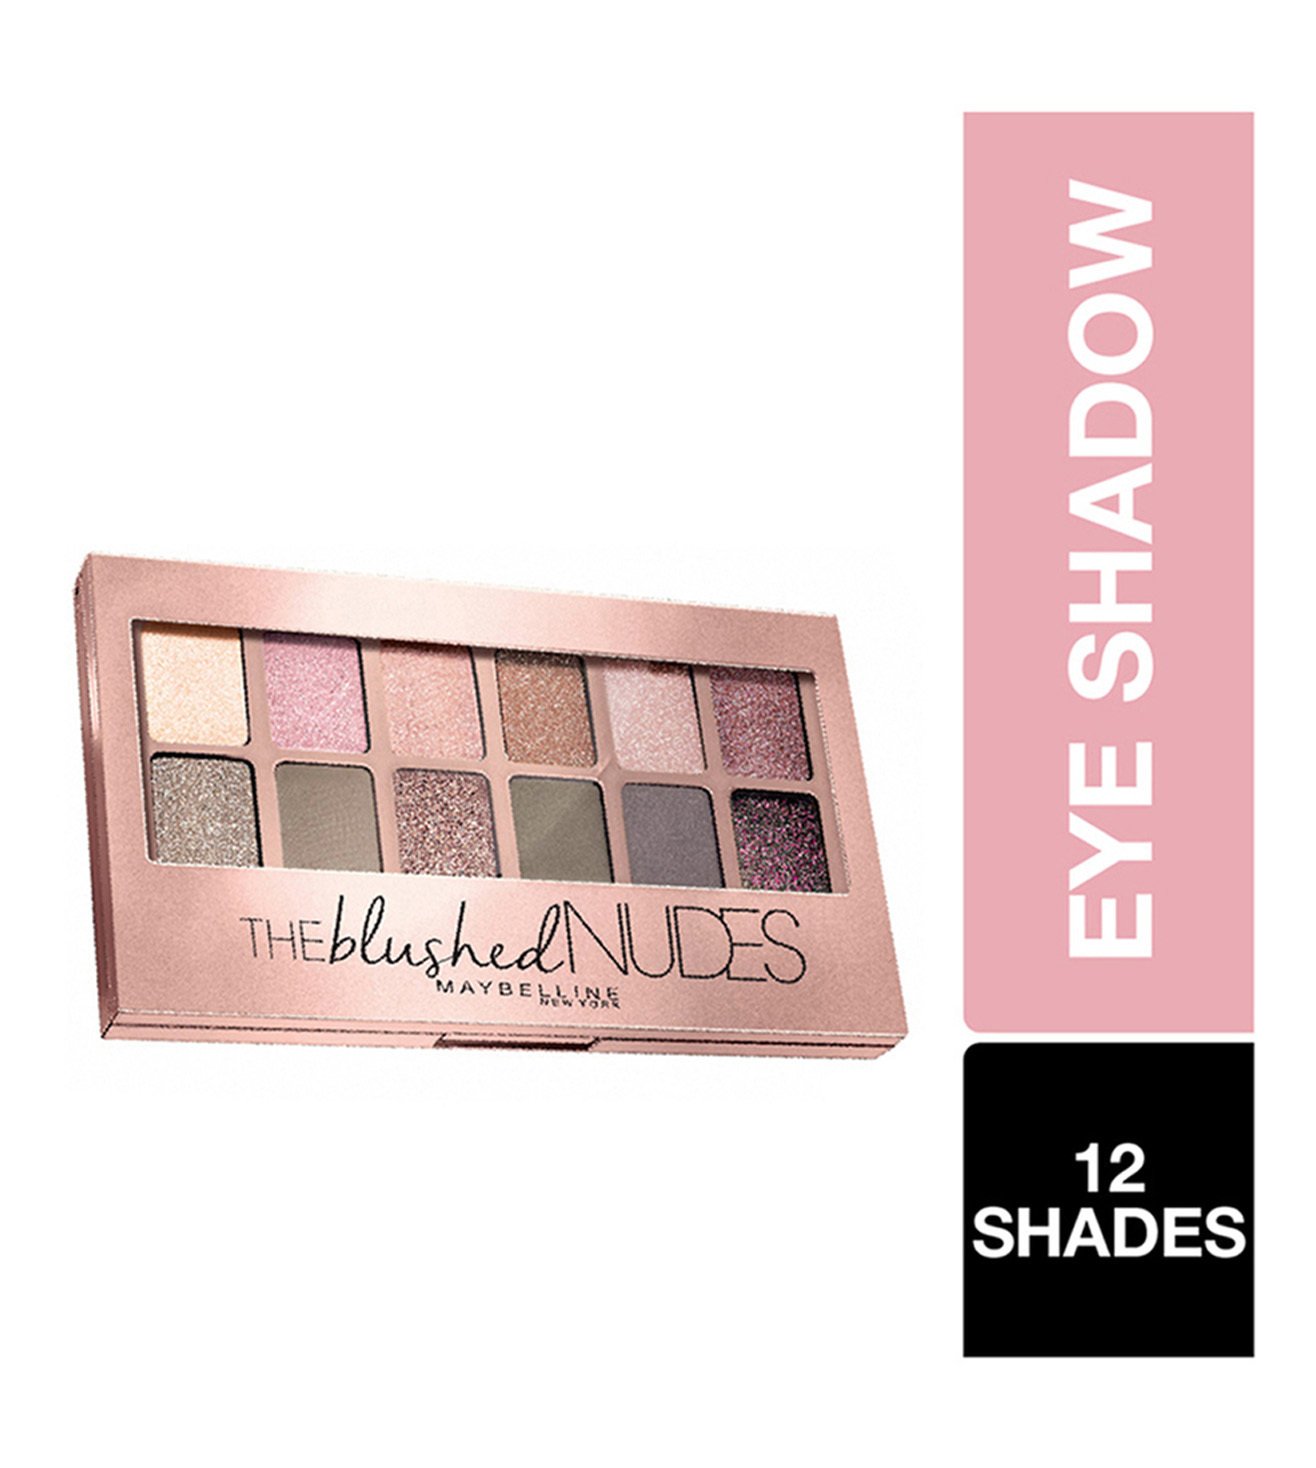 Buy Maybelline Online York Blushed Nudes 9gm Shadow The CLiQ Tata Palette, Palette On Eye New